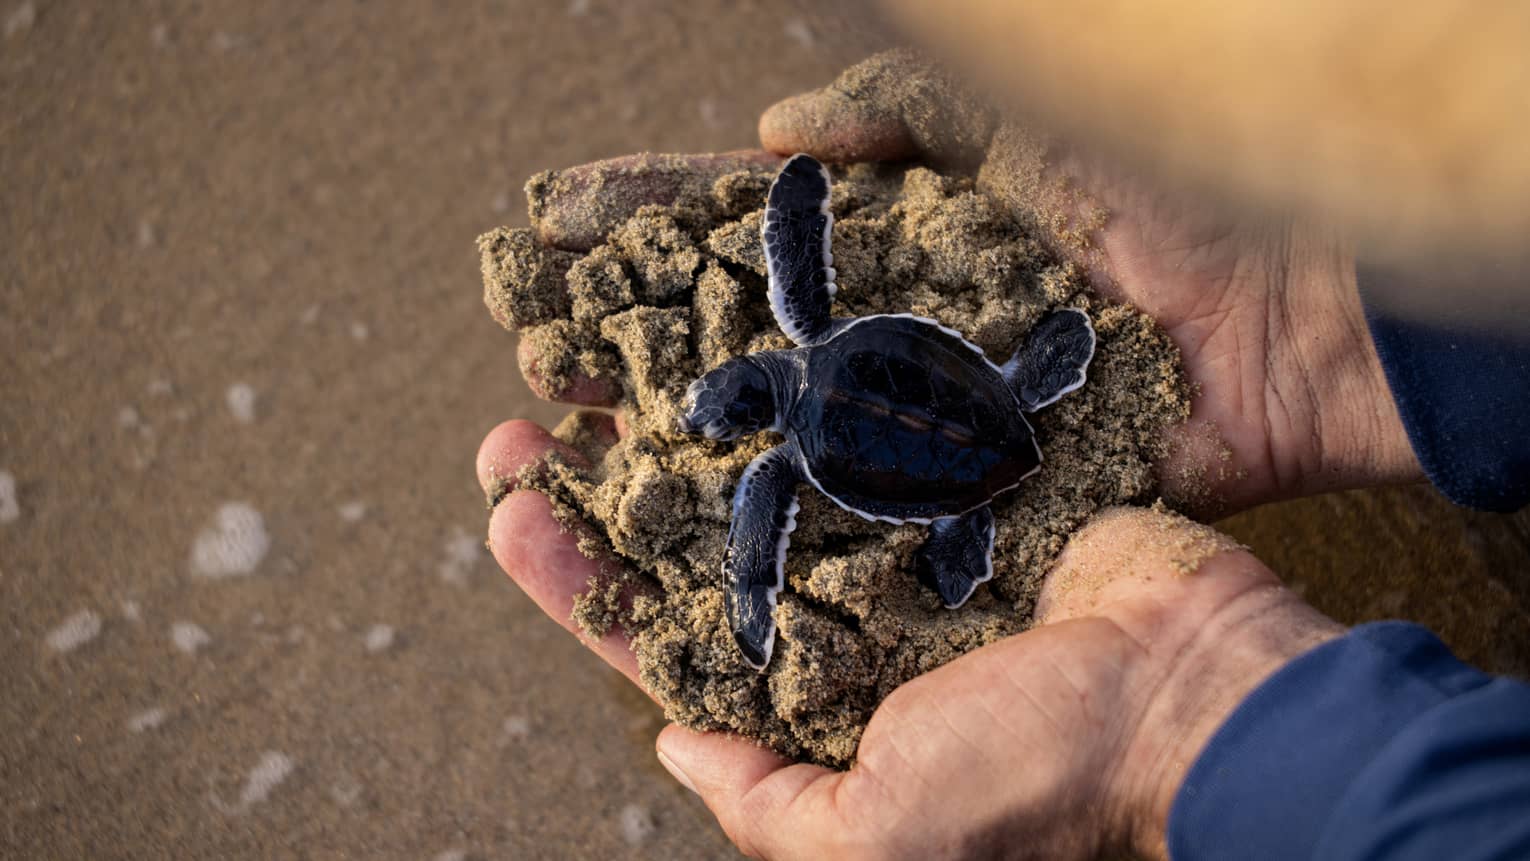 A person holding a small sea turtle in sand.